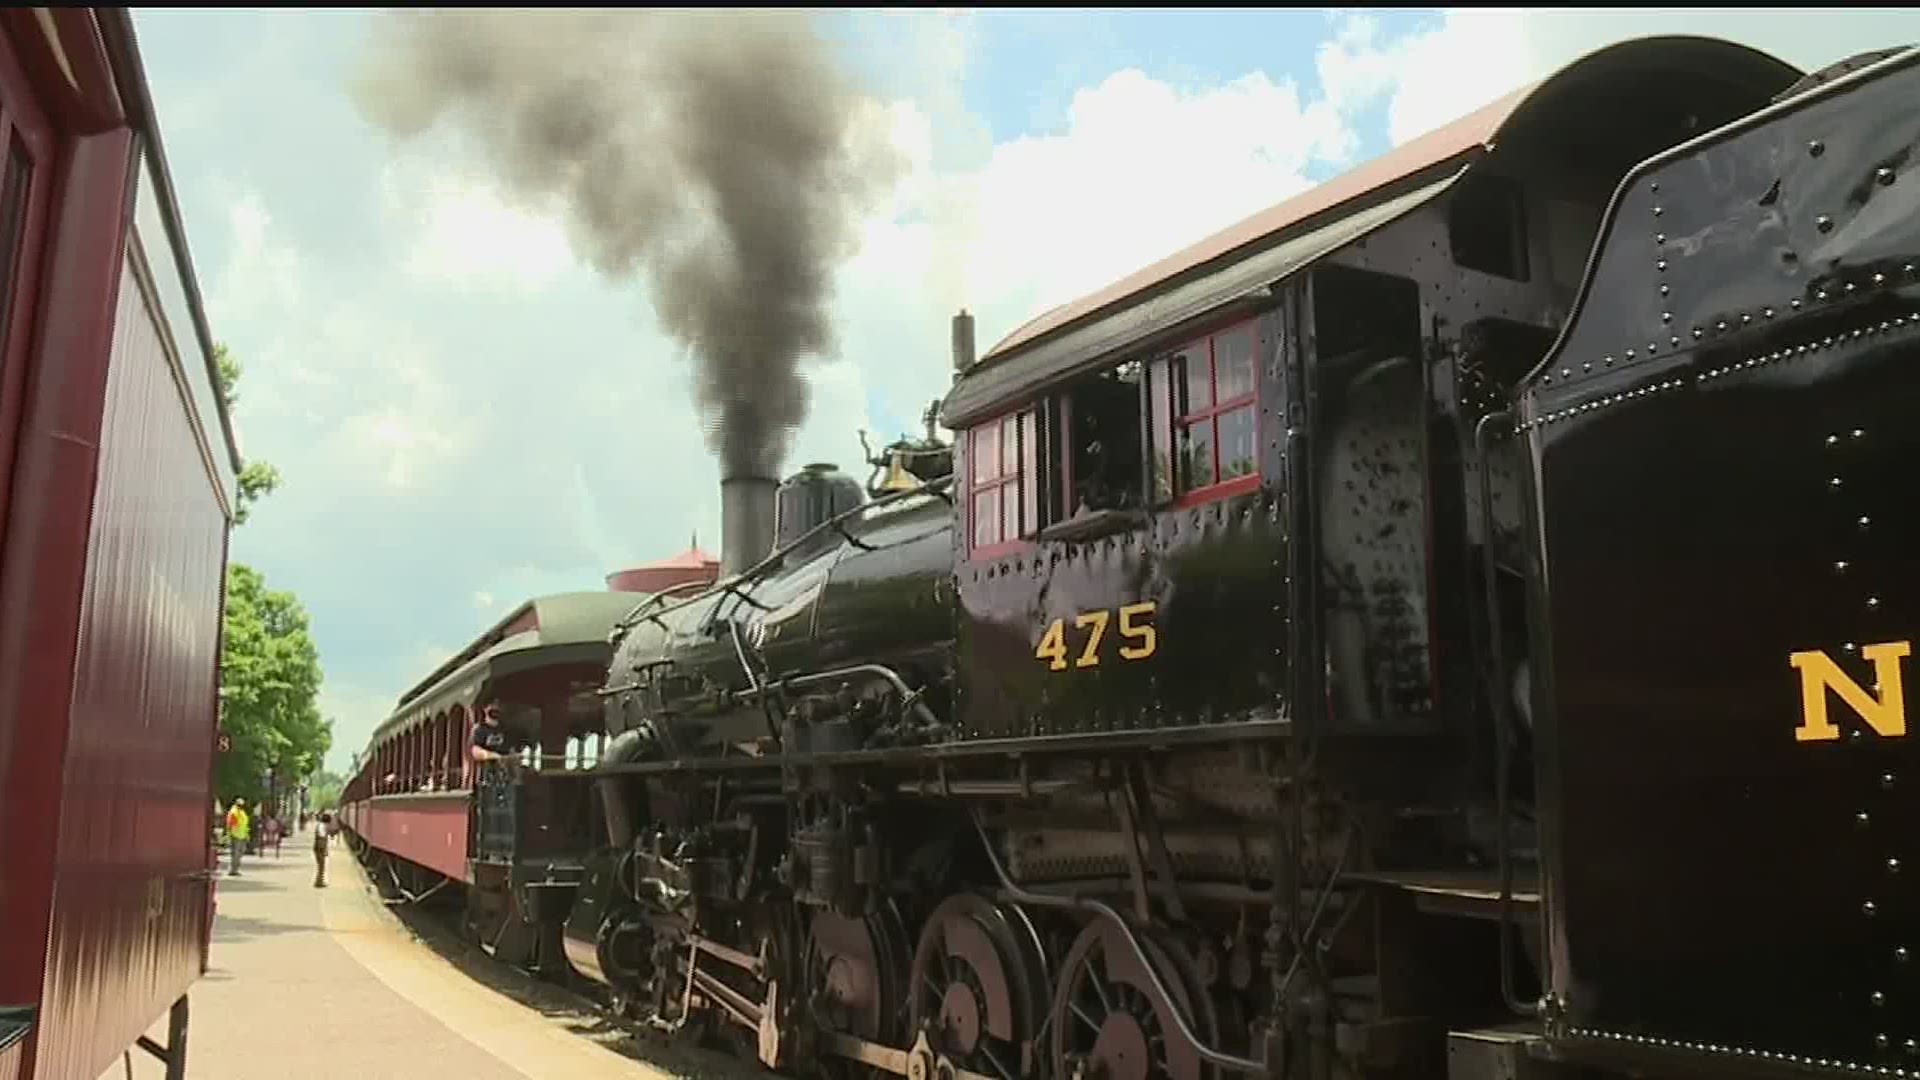 The railroad fires up it's trains for the first weekend back in business after being closed for months